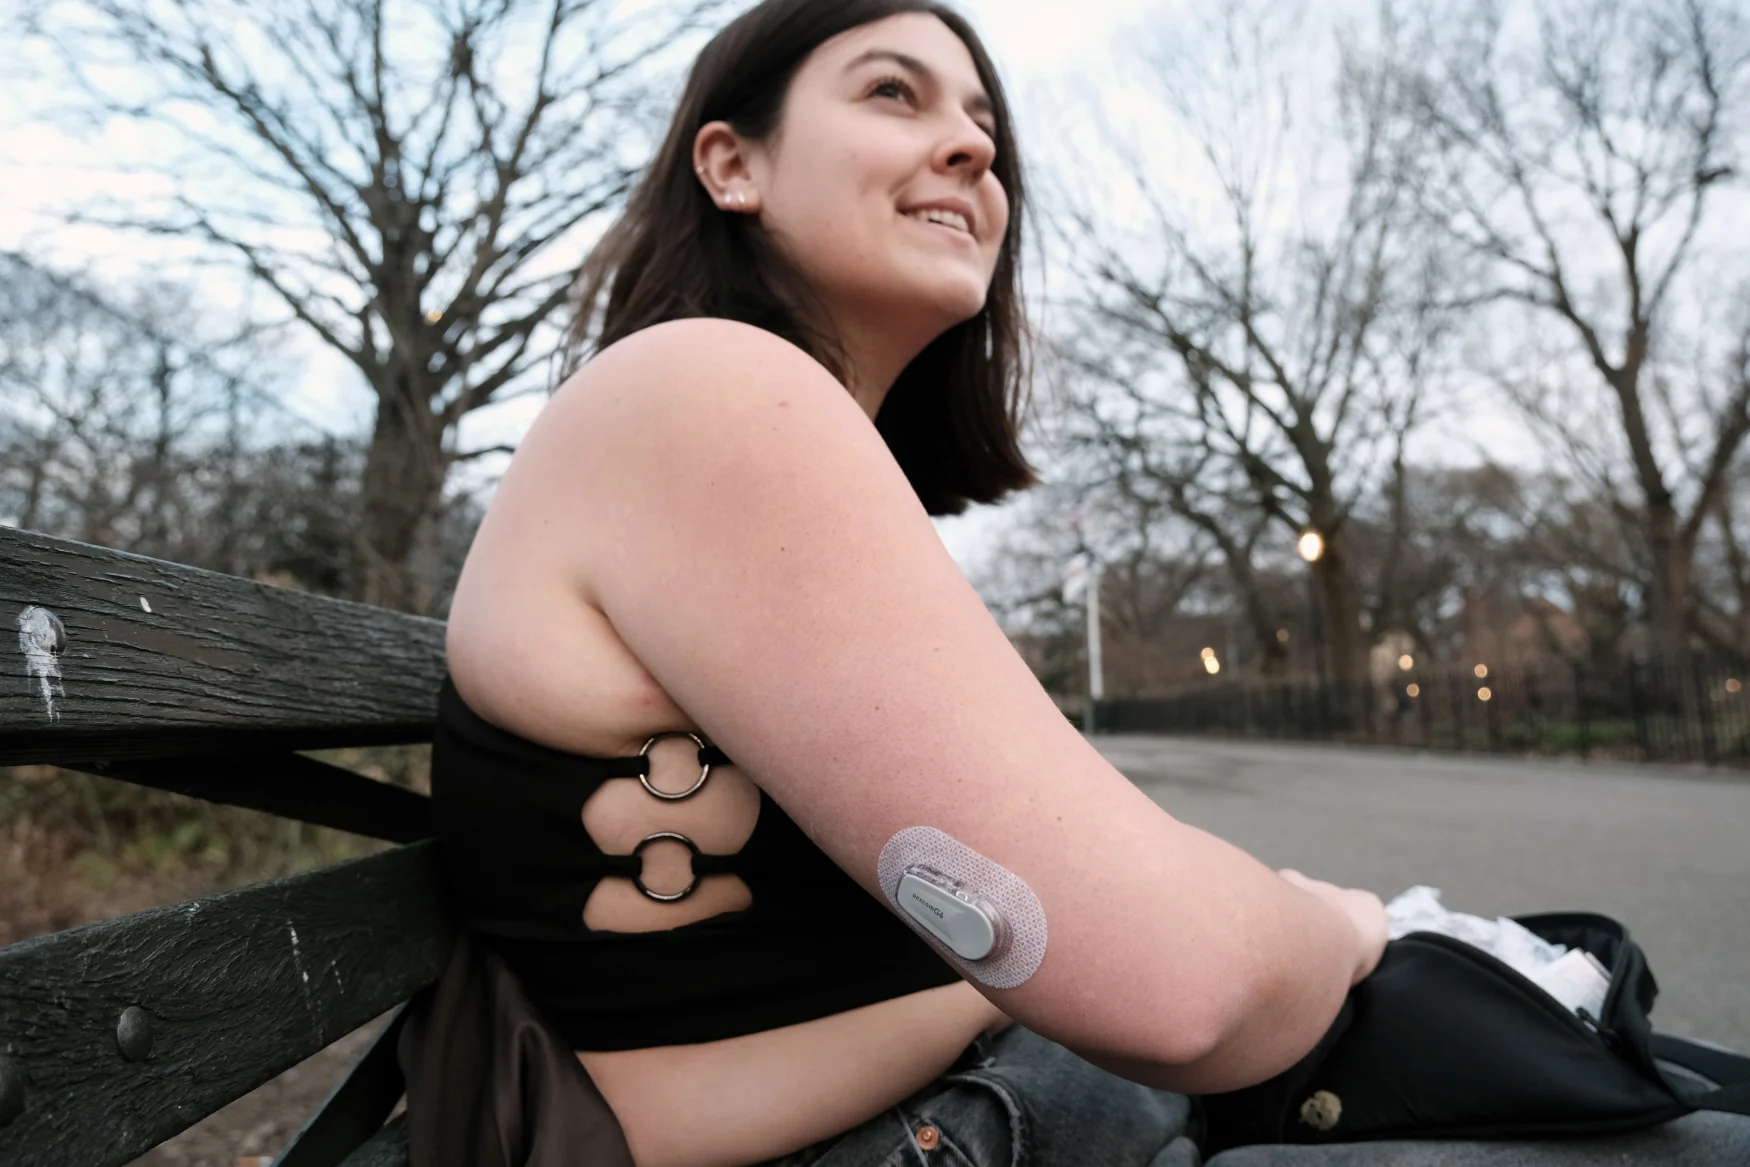 NEW YORK, NEW YORK - MARCH 02: Taylor Jane Stimmler, whose had type 1 diabetes since she was a teenager, displays her continuous glucose monitor she wears on her arm on March 02, 2023 in New York City. Drugmaker Eli Lilly announced yesterday that it will cap the out-of-pocket cost of its insulin at $35 a month. Medical experts believe that the unexpected move may compel other insulin makers in the U.S. to follow suit and cap their prices of insulin. For those without health insurance or a health plan, the cost of insulin can cost hundreds or thousands of dollars a month for a diabetic. (Photo by Spencer Platt/Getty Images)